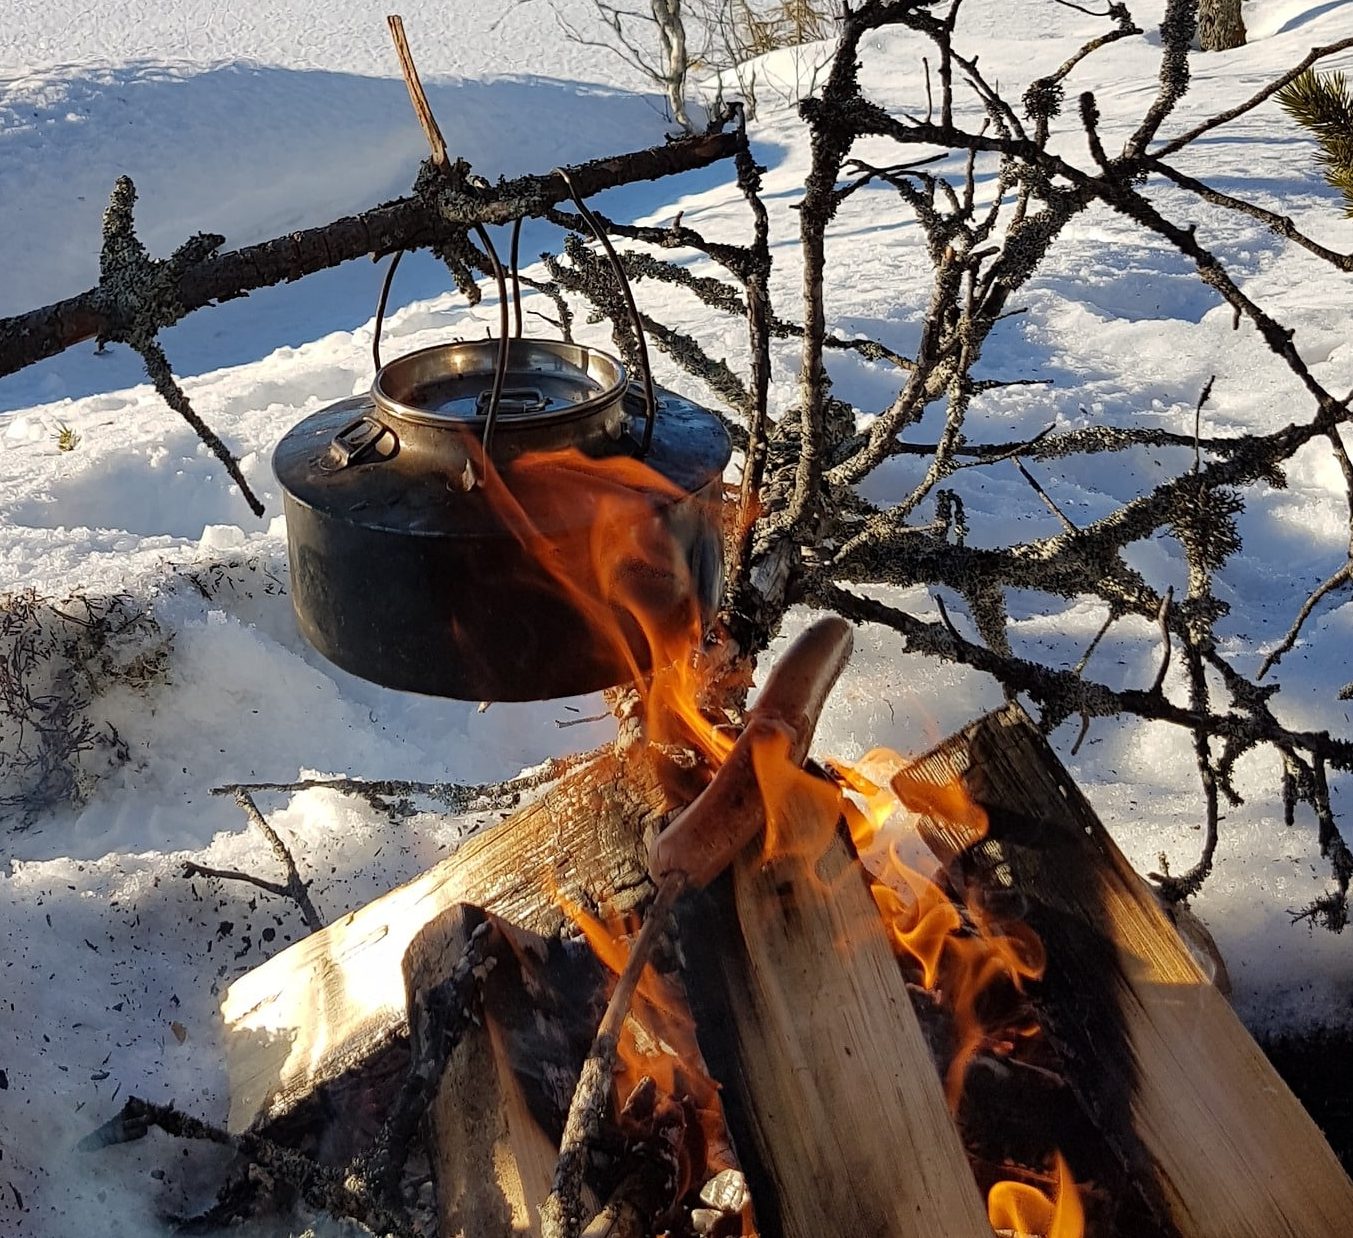 How to have coffee while camping